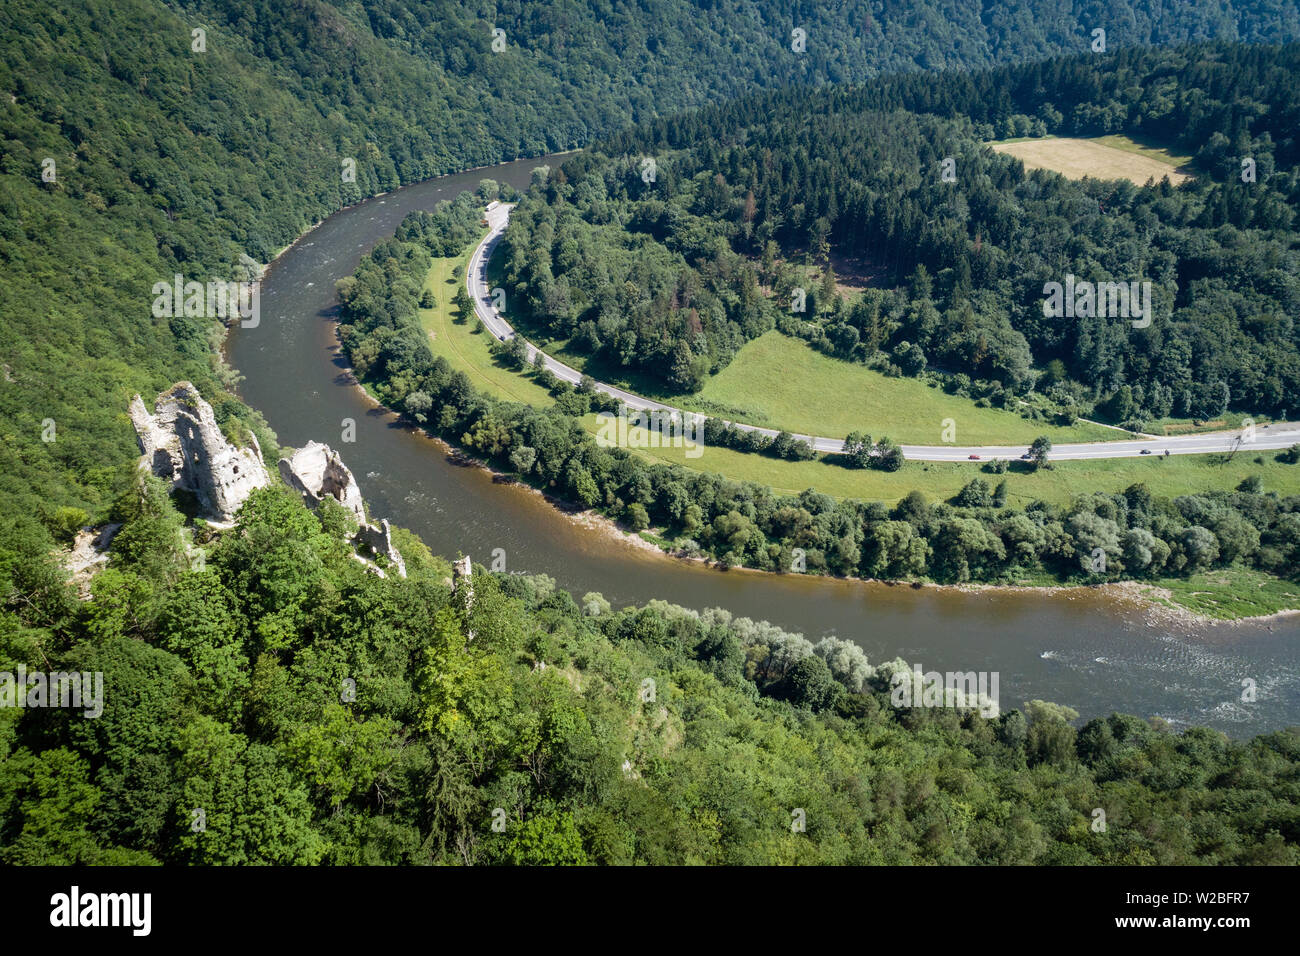 Domasinsky meander of Vah river, Starhrad ruins castle with road around, meadows, forest and hills of Lucanska Mala Fatra mountains, Slovakia Stock Photo